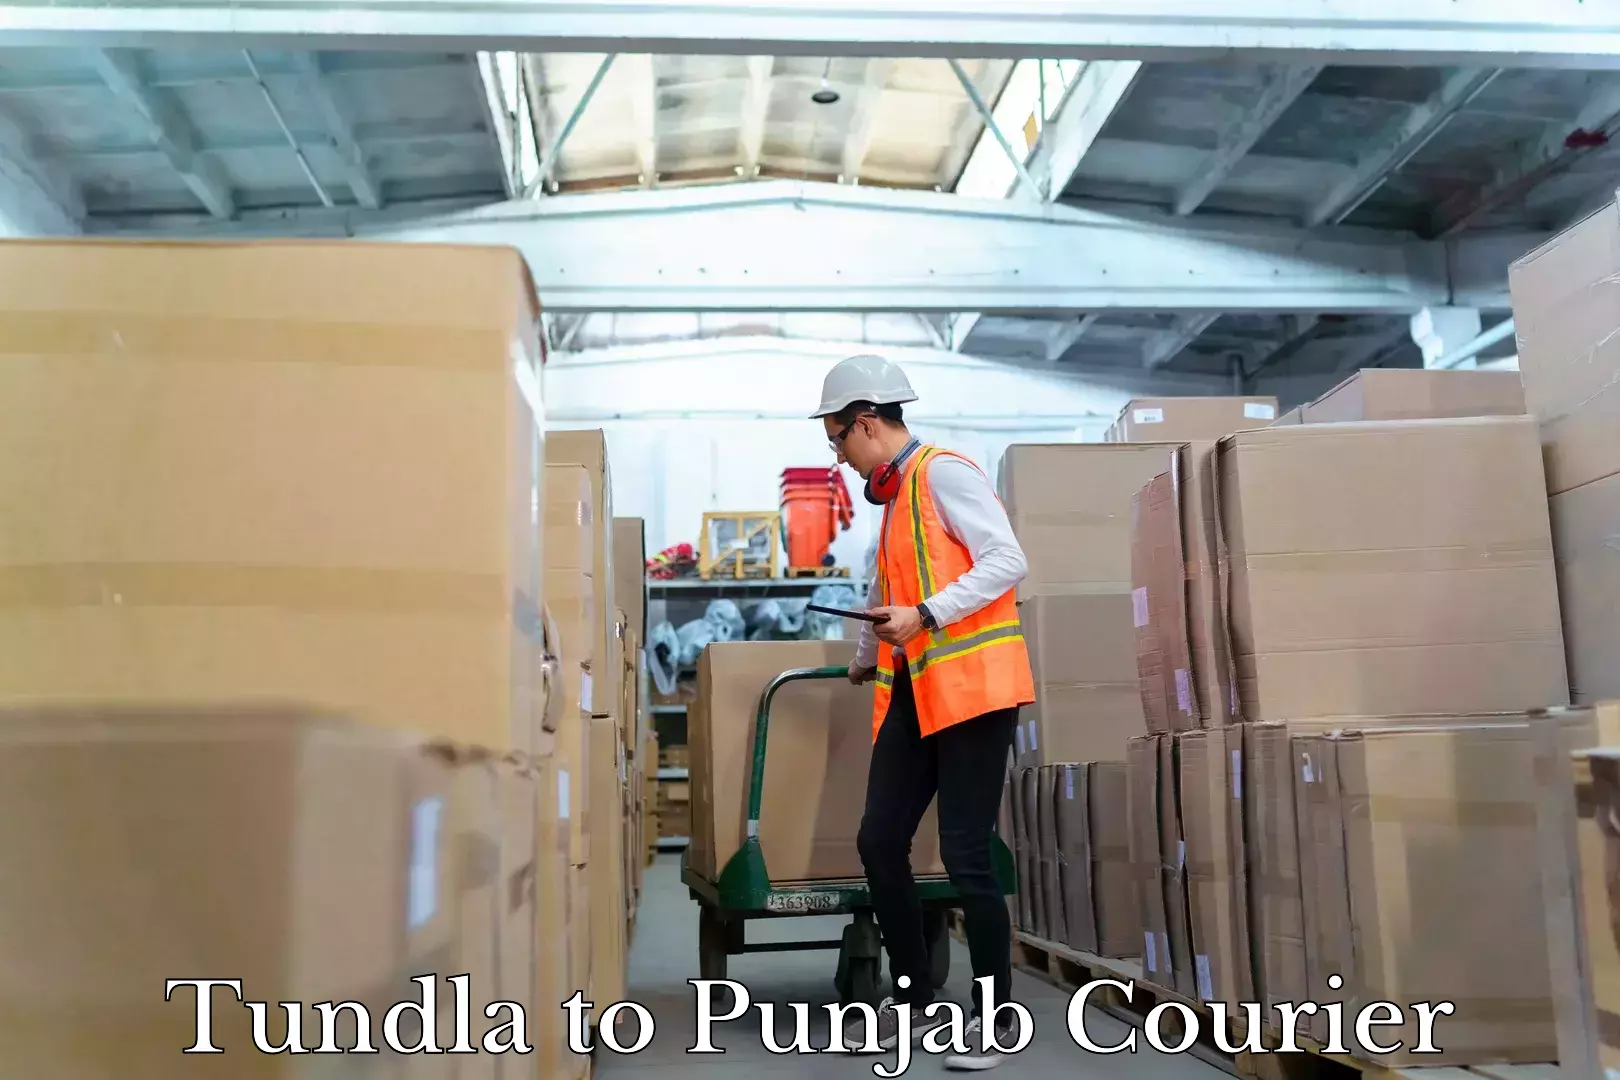 Express delivery network Tundla to Punjab